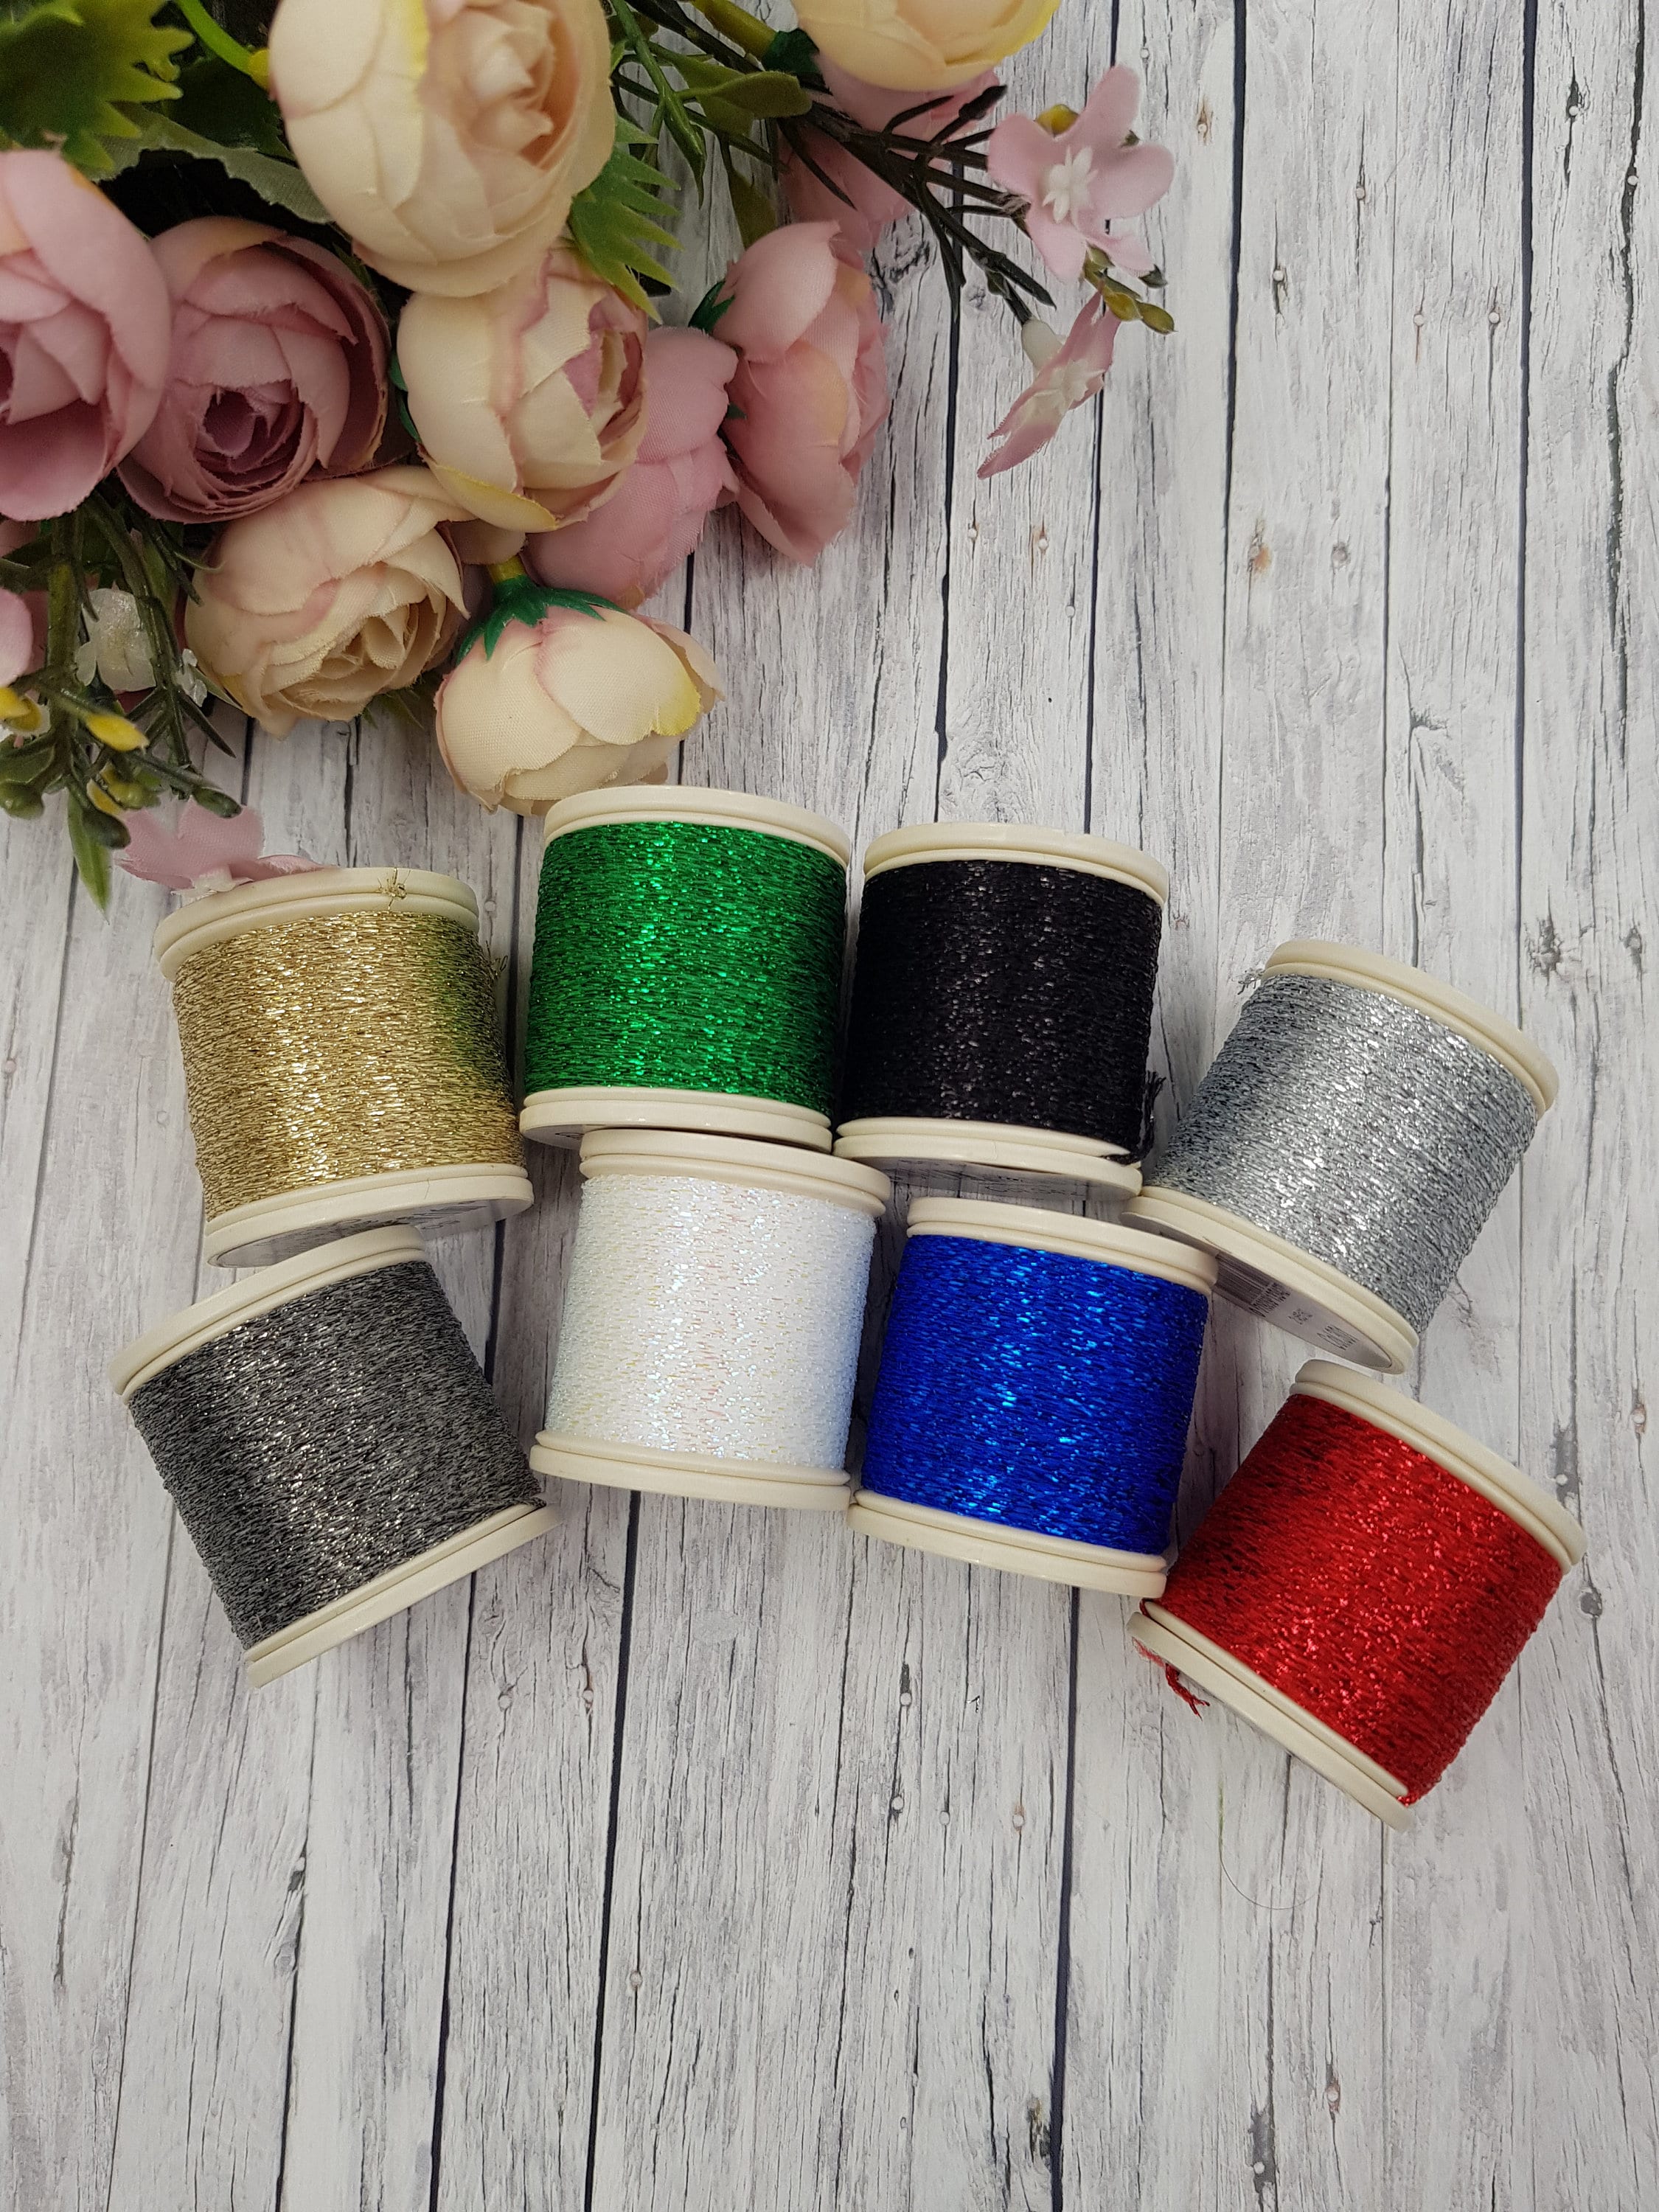 Embroidery Thread DMC Mouline Floss White Light Colors Shades Stranded  Cotton Floss Cross Stitch Embroidery Floss 8m 8.7 Yd 